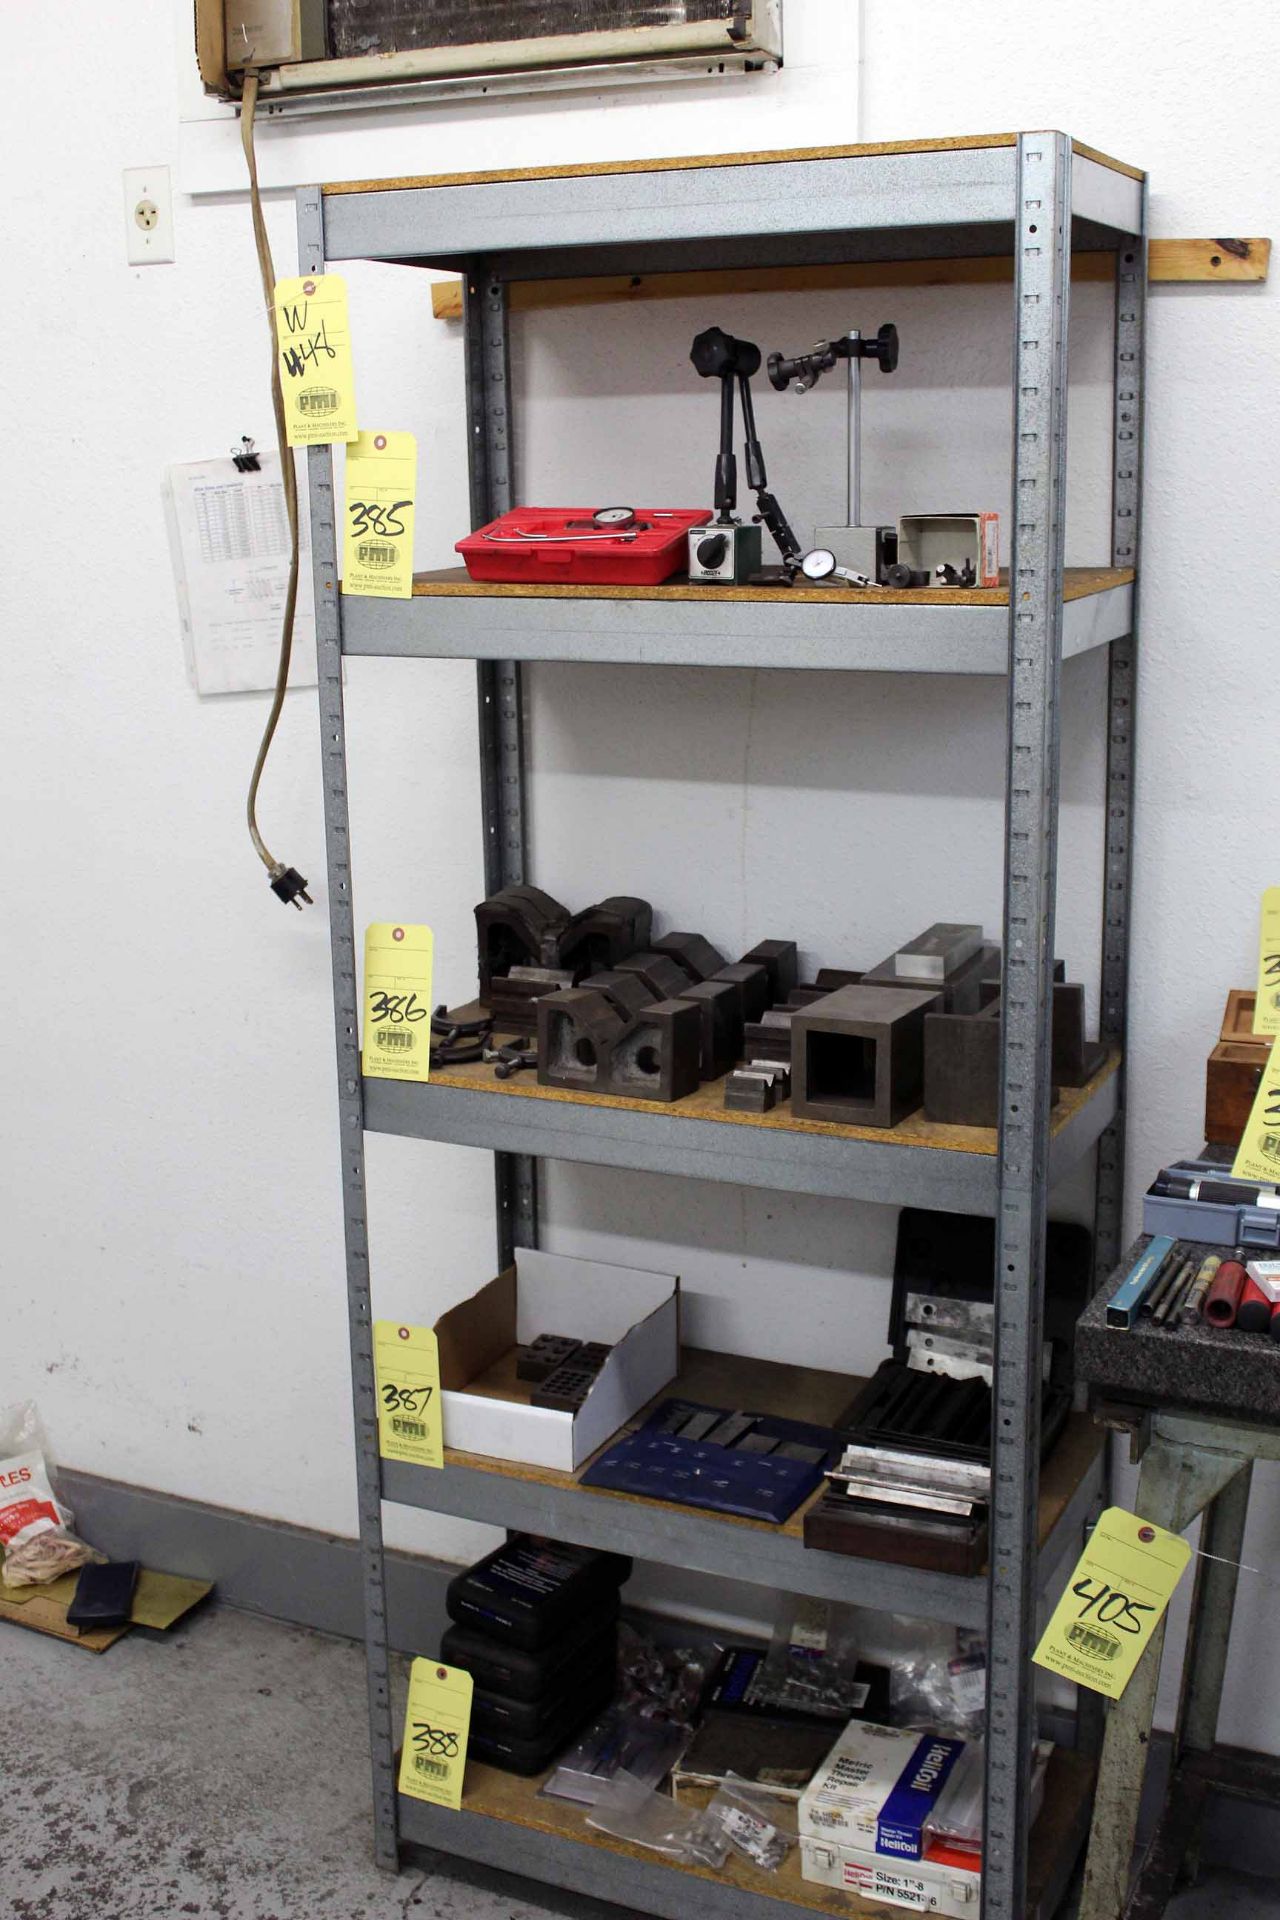 LOT CONSISTING OF: chrome wire rack, roller table, adjustable metal shelves - Image 2 of 3